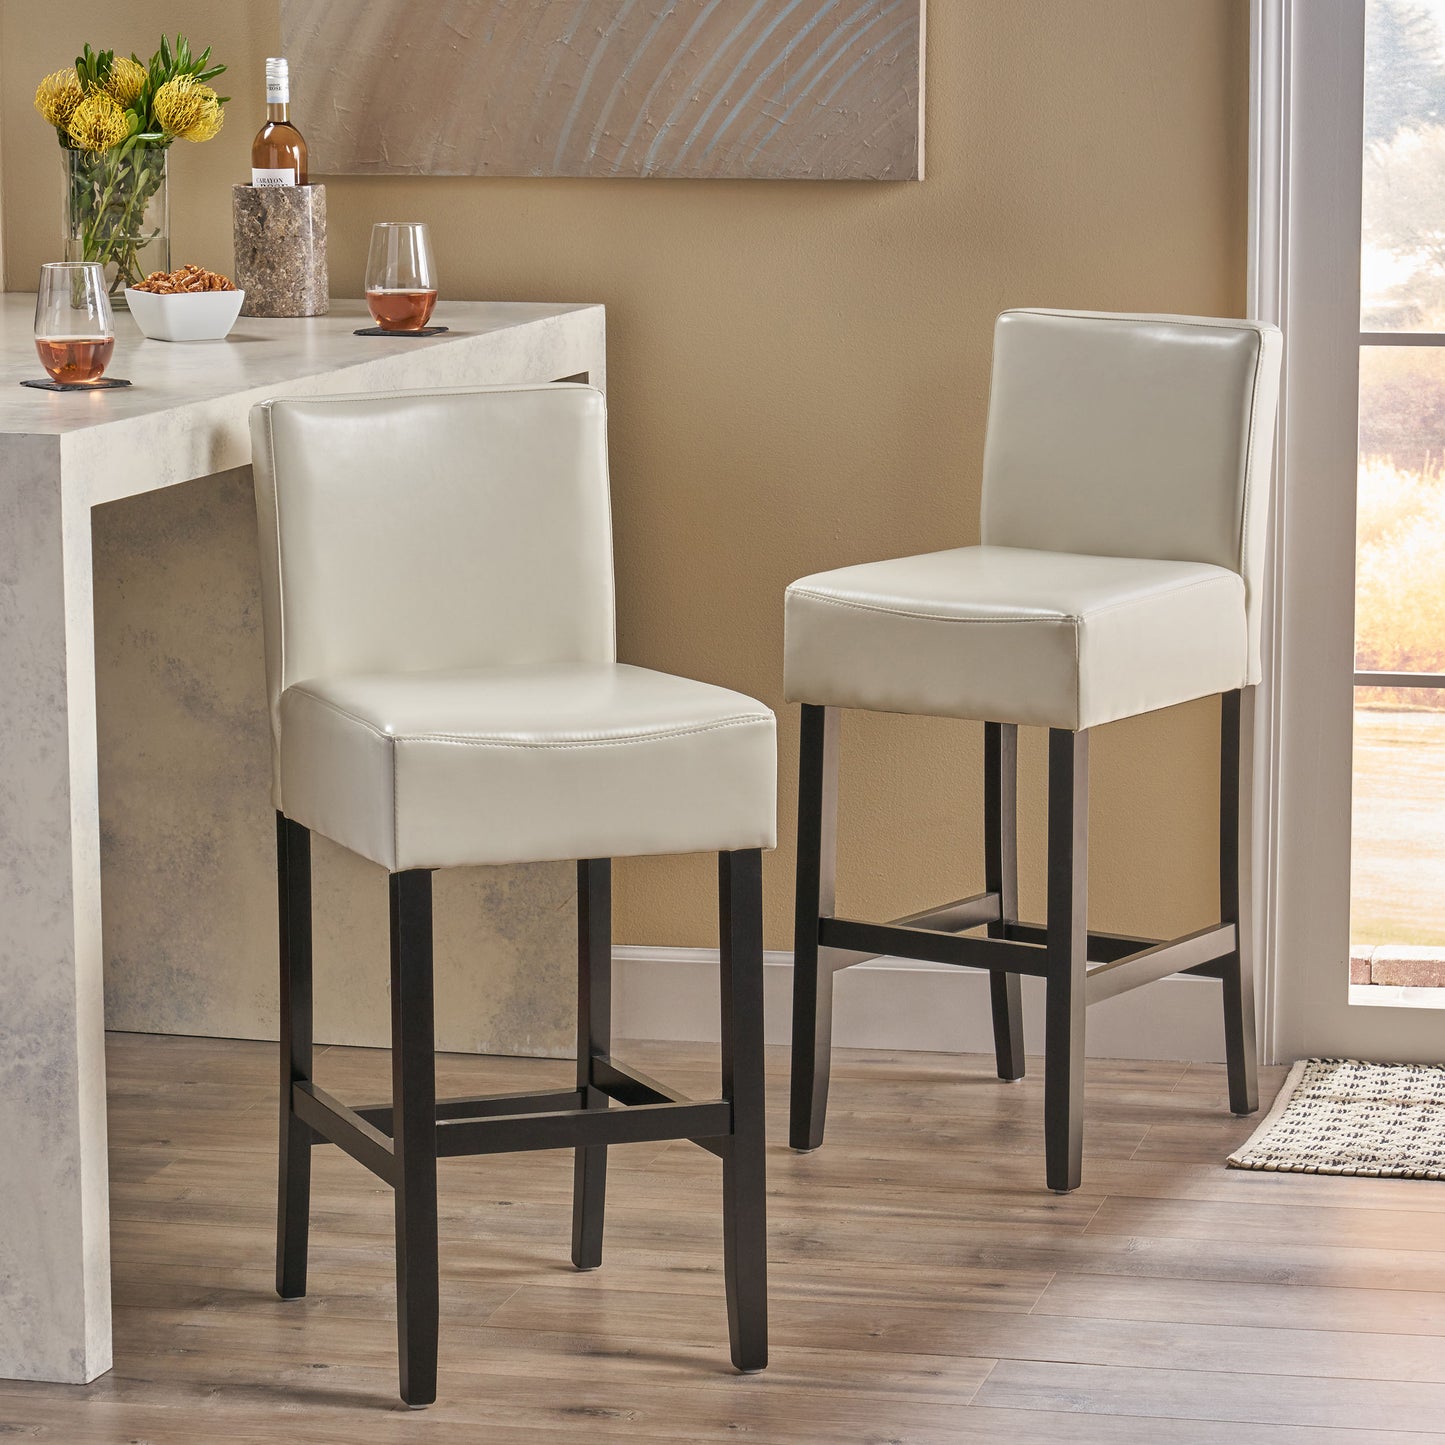 Lowry Contemporary Upholstered Ivory Bonded Leather Backed Barstools (Set of 2)